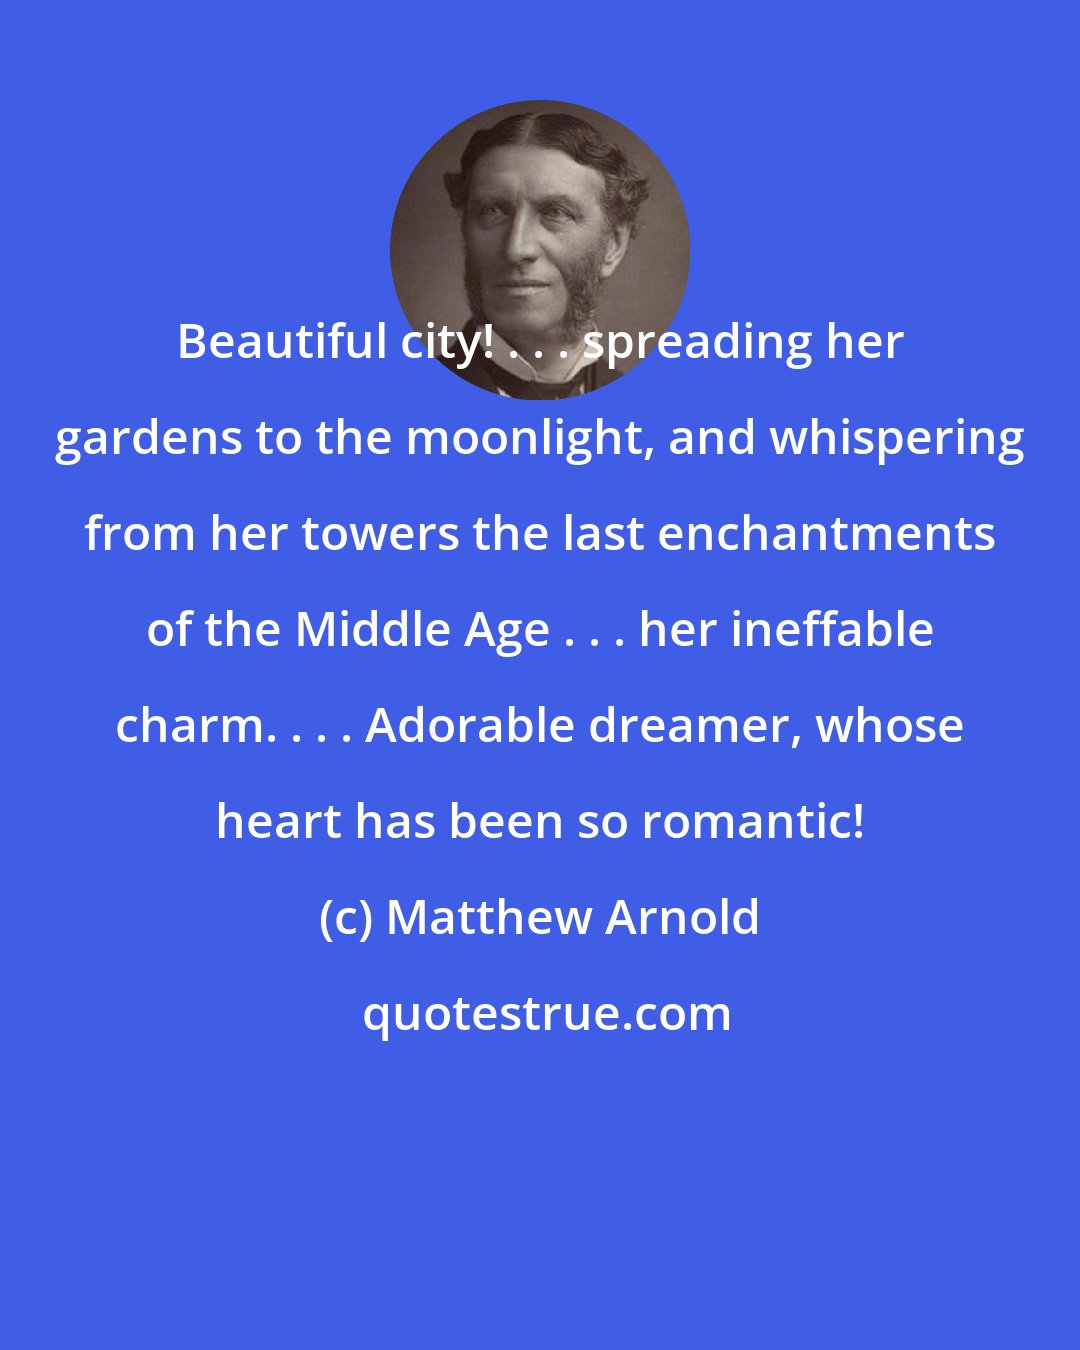 Matthew Arnold: Beautiful city! . . . spreading her gardens to the moonlight, and whispering from her towers the last enchantments of the Middle Age . . . her ineffable charm. . . . Adorable dreamer, whose heart has been so romantic!